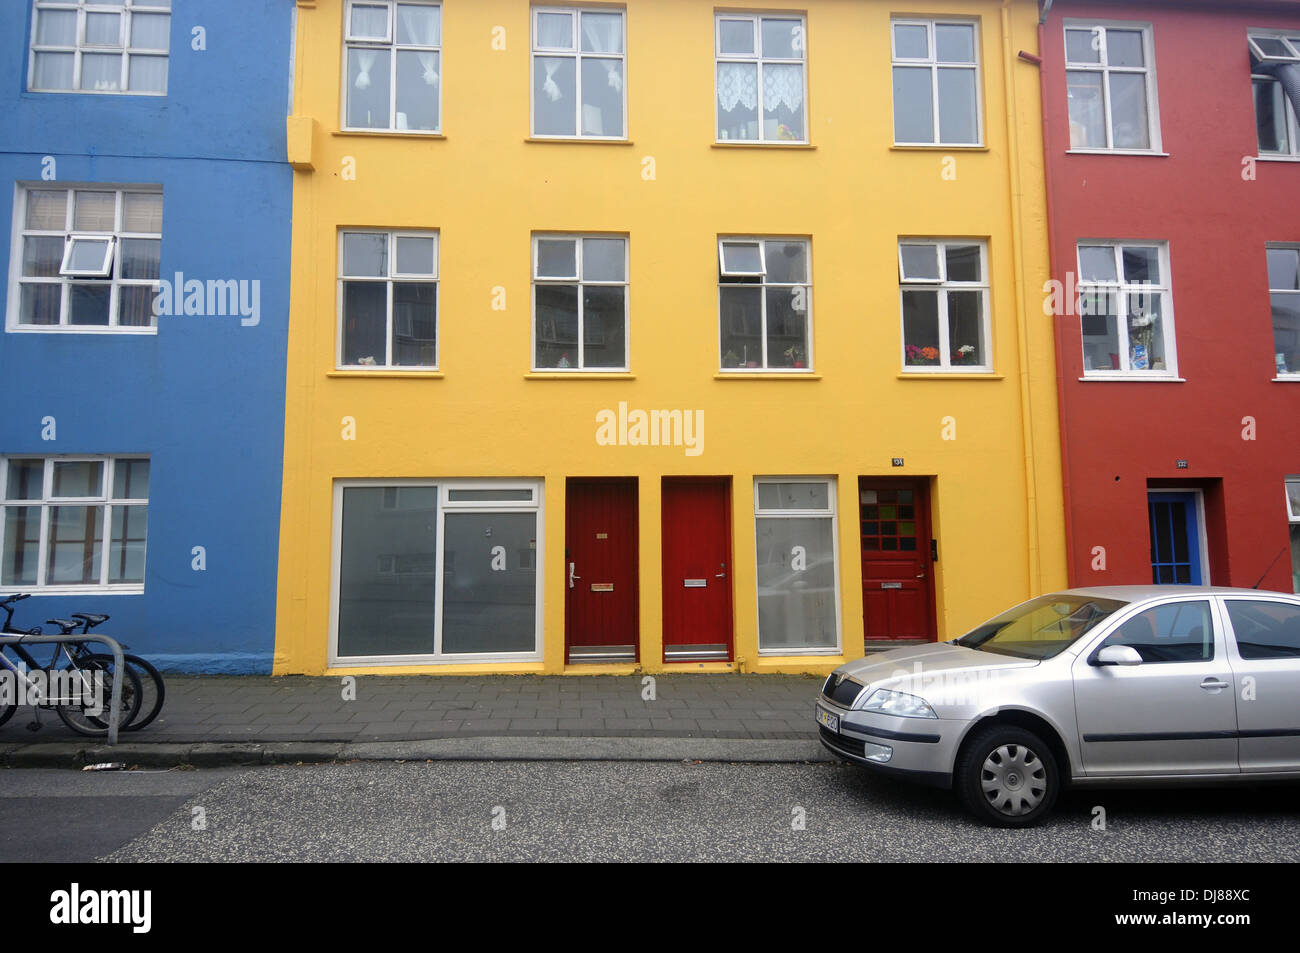 Street scene with apartment buildings, downtown Reykjavik, Iceland Stock Photo